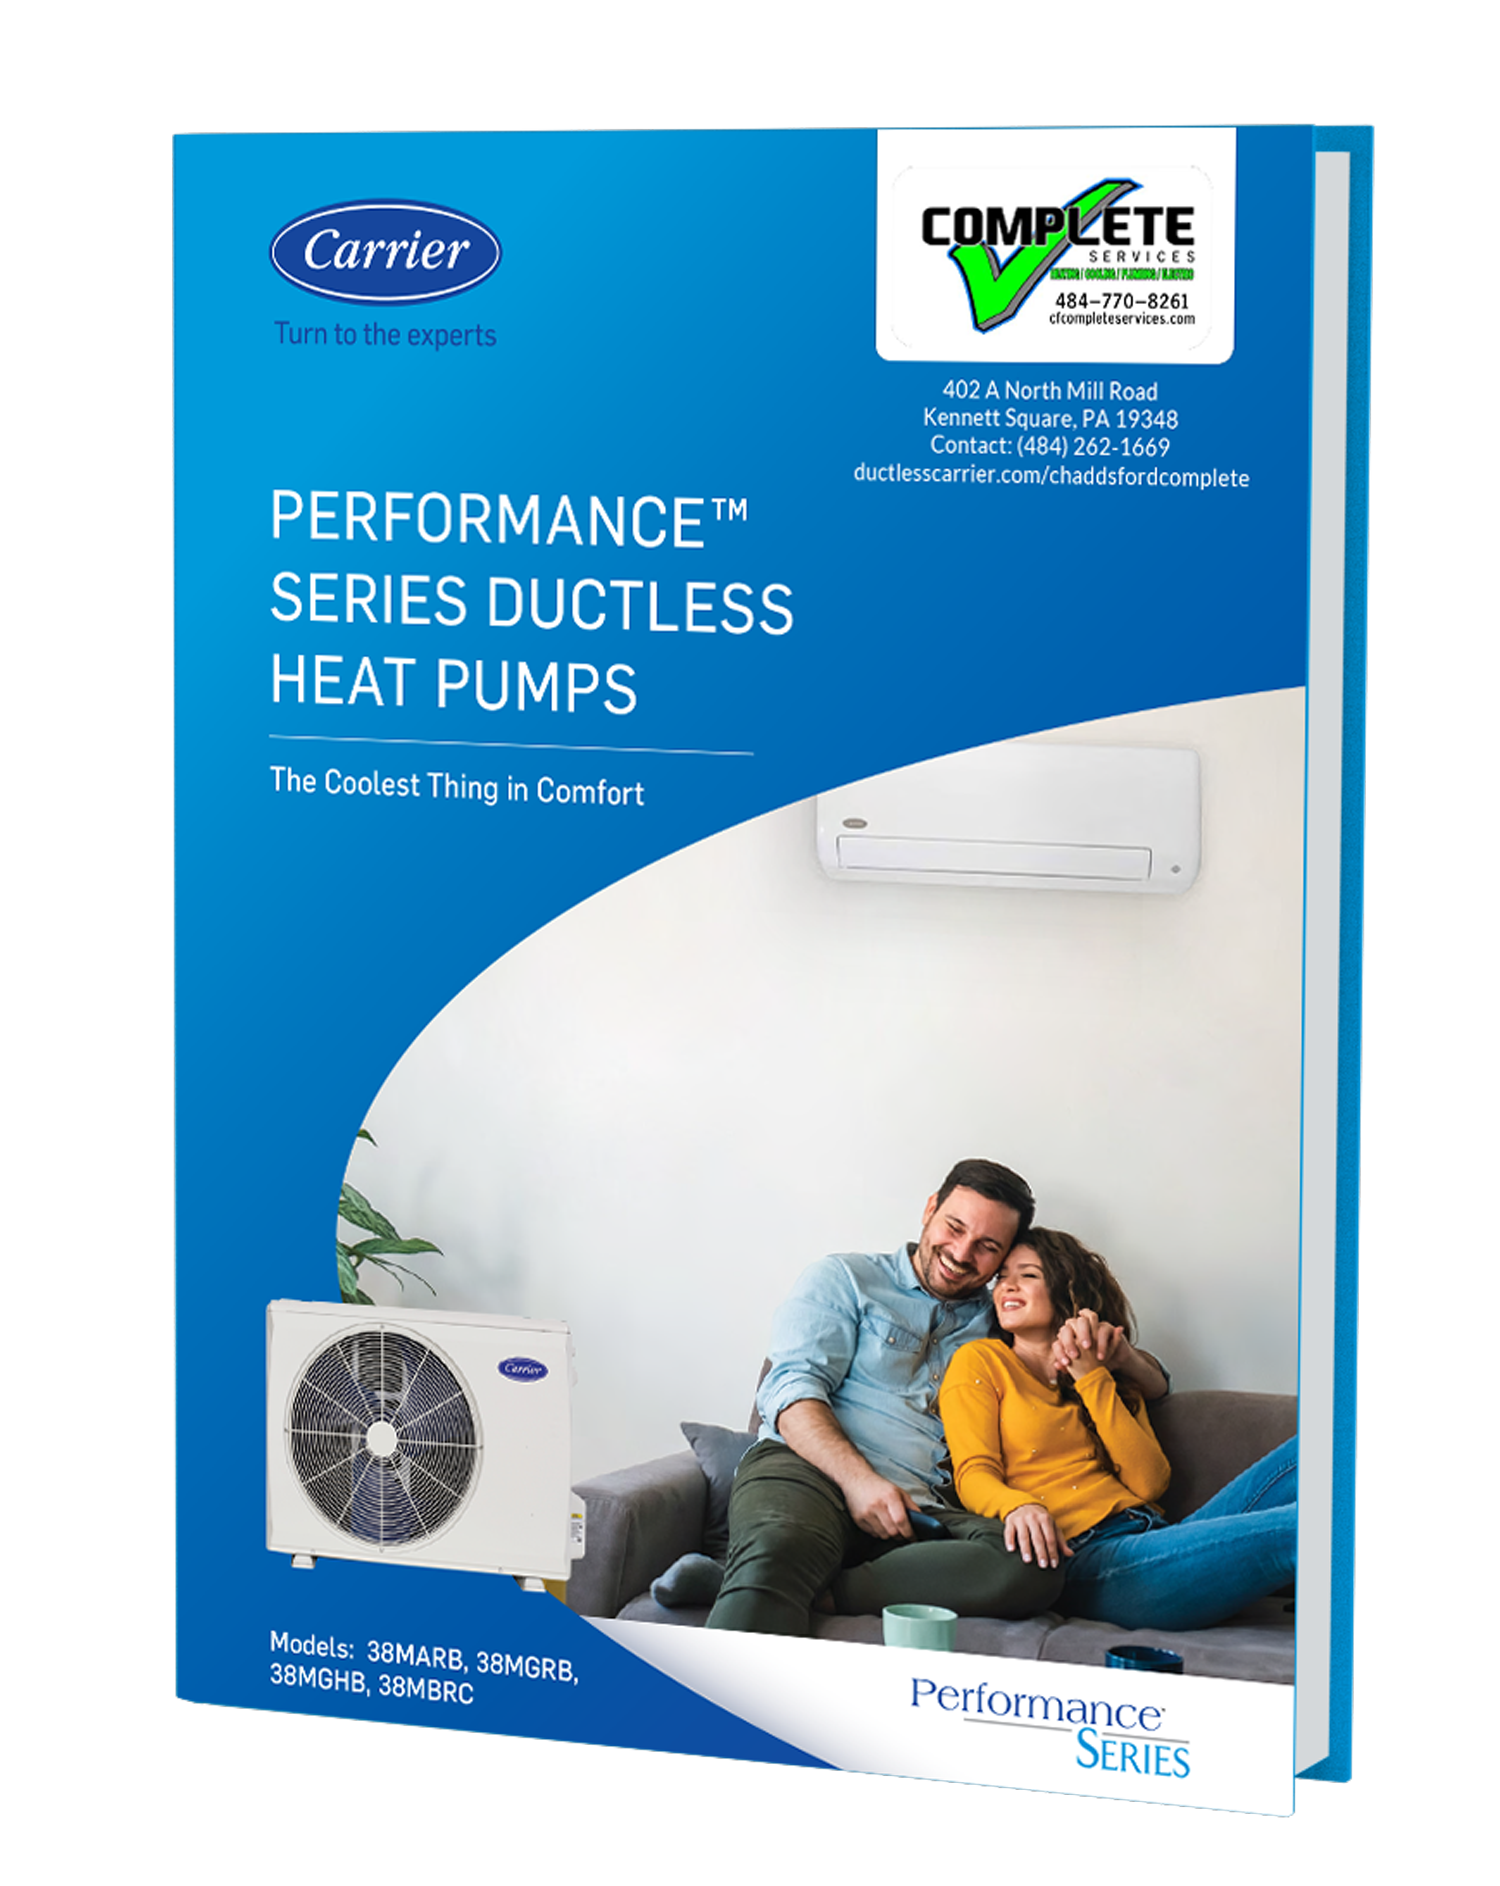 Chadds Ford Complete Comfort Carrier Ductless Product Guide